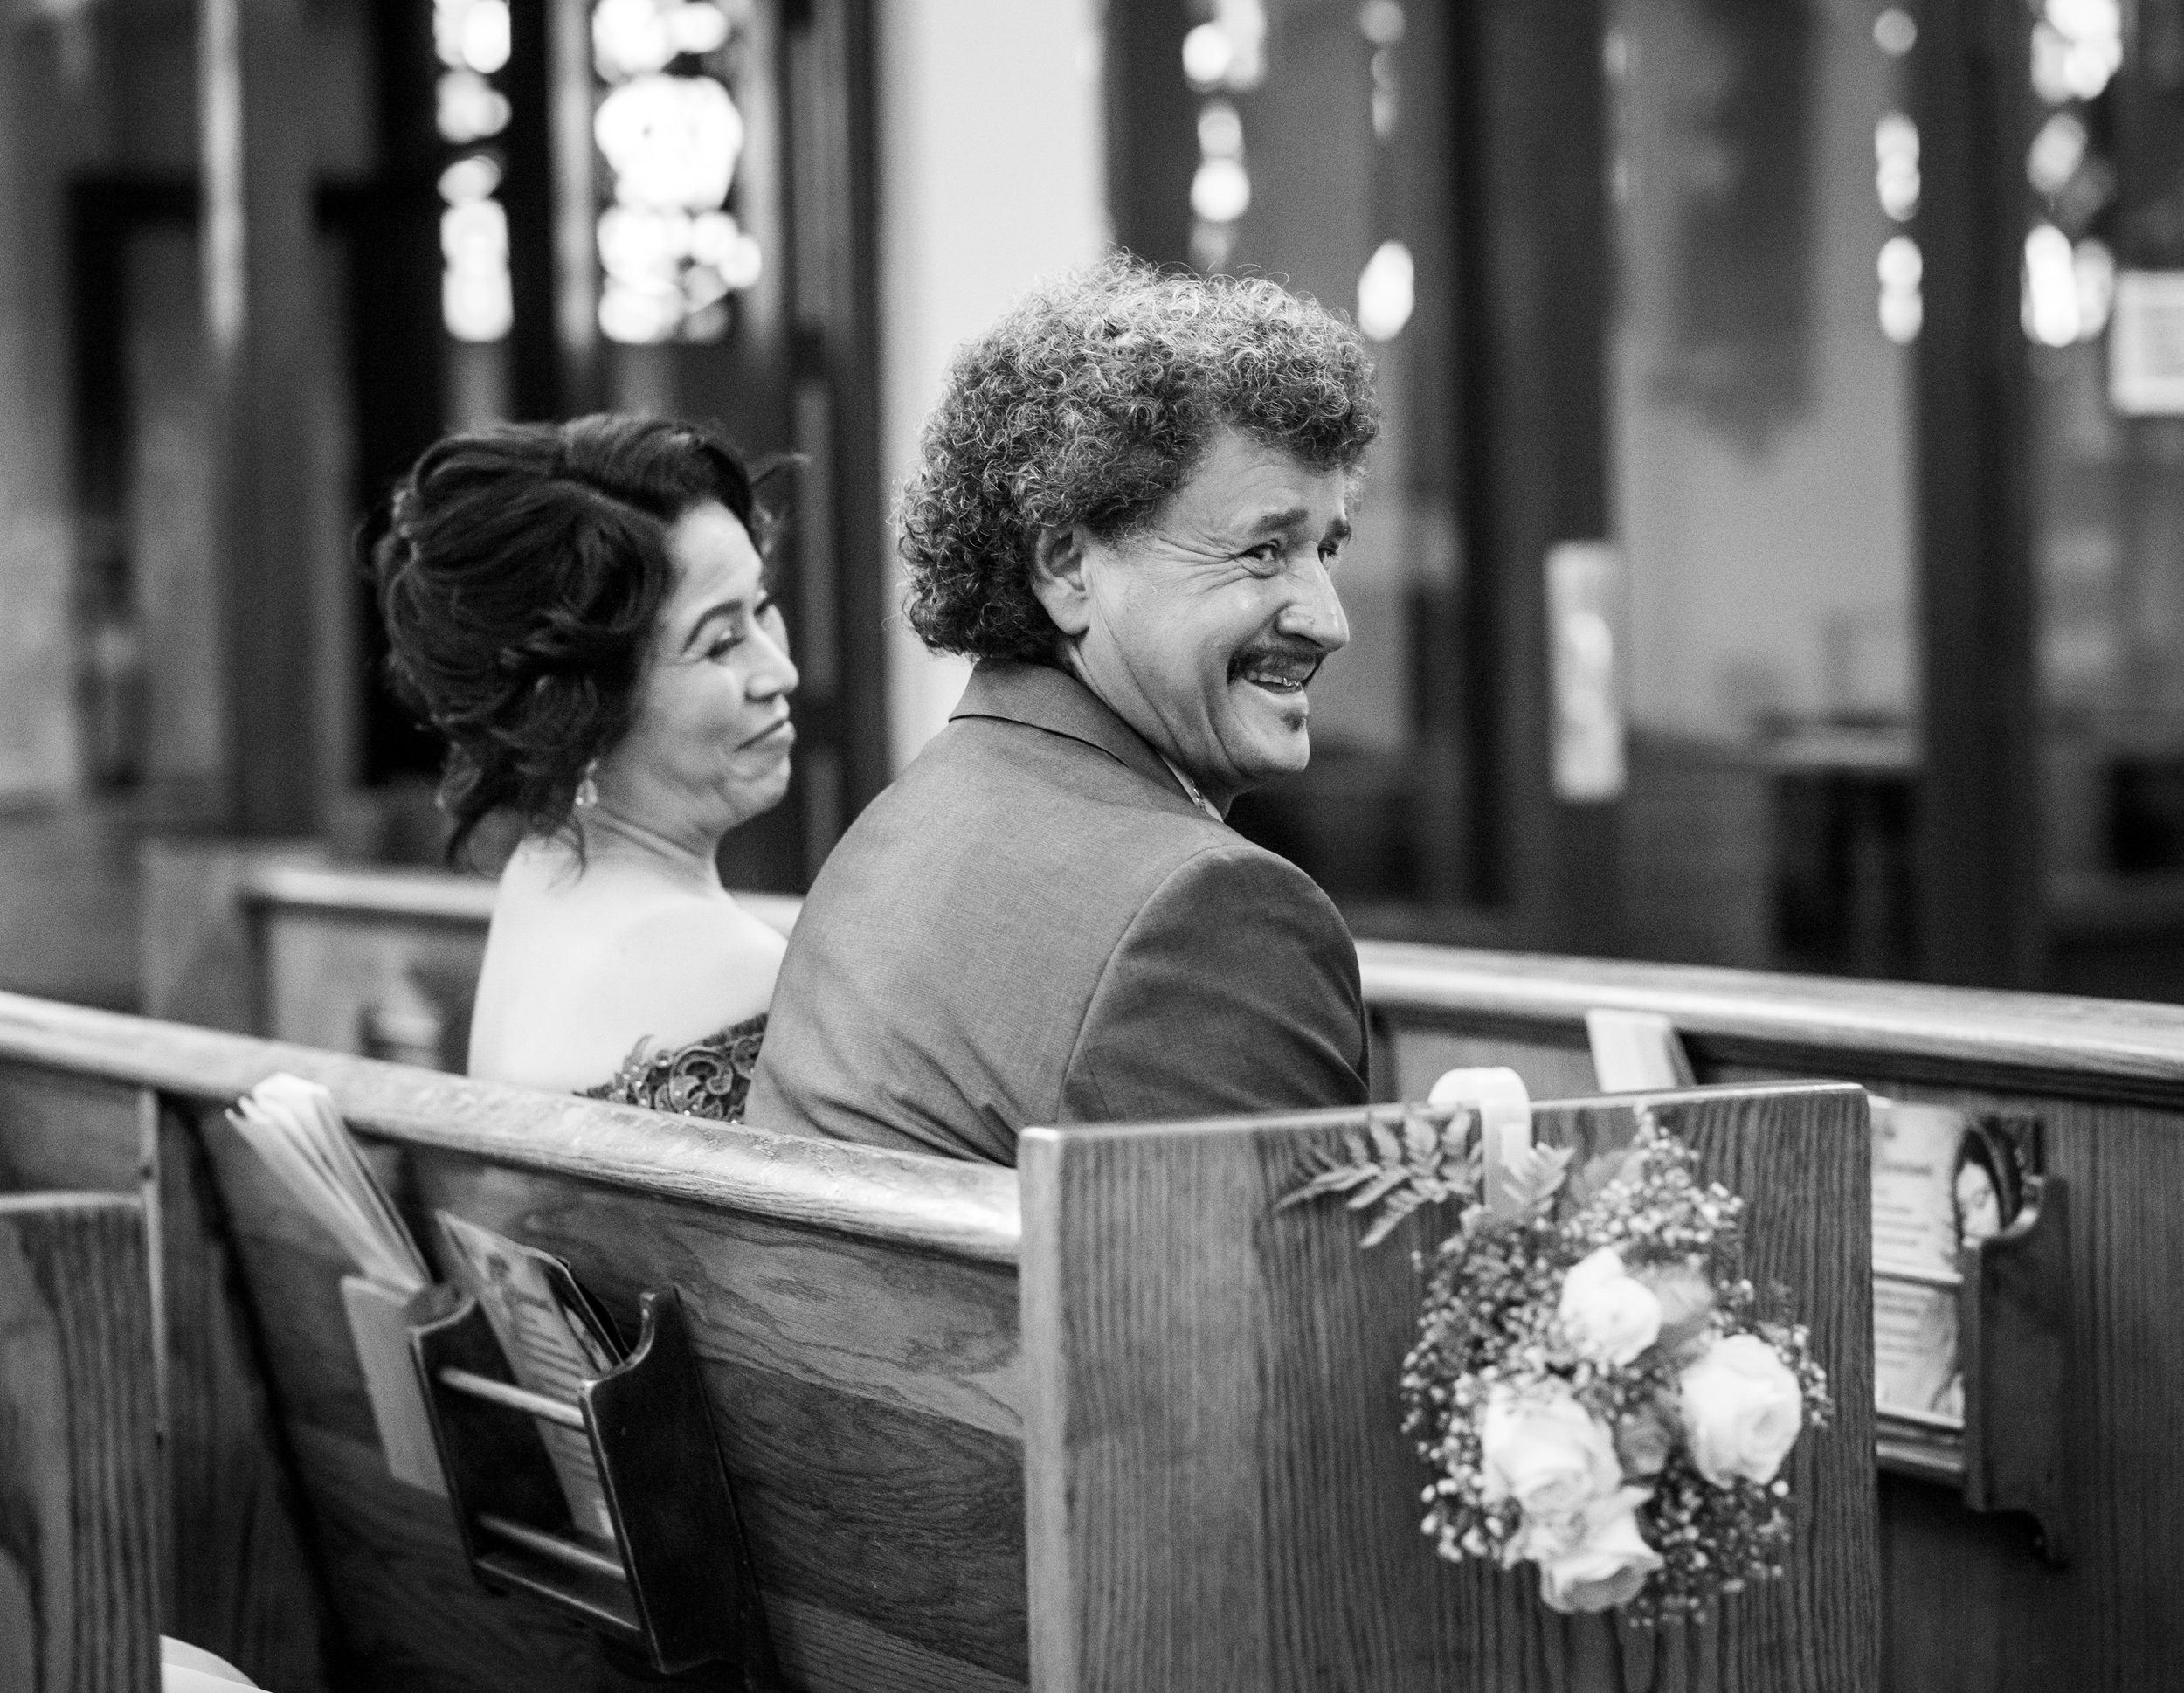 Adriana Gonzalez’s parents Adolofo Gonzalez and Telma Hernandez during Adriana’s quinceañera at Our Lady of Guadalupe Church in Sacramento, California